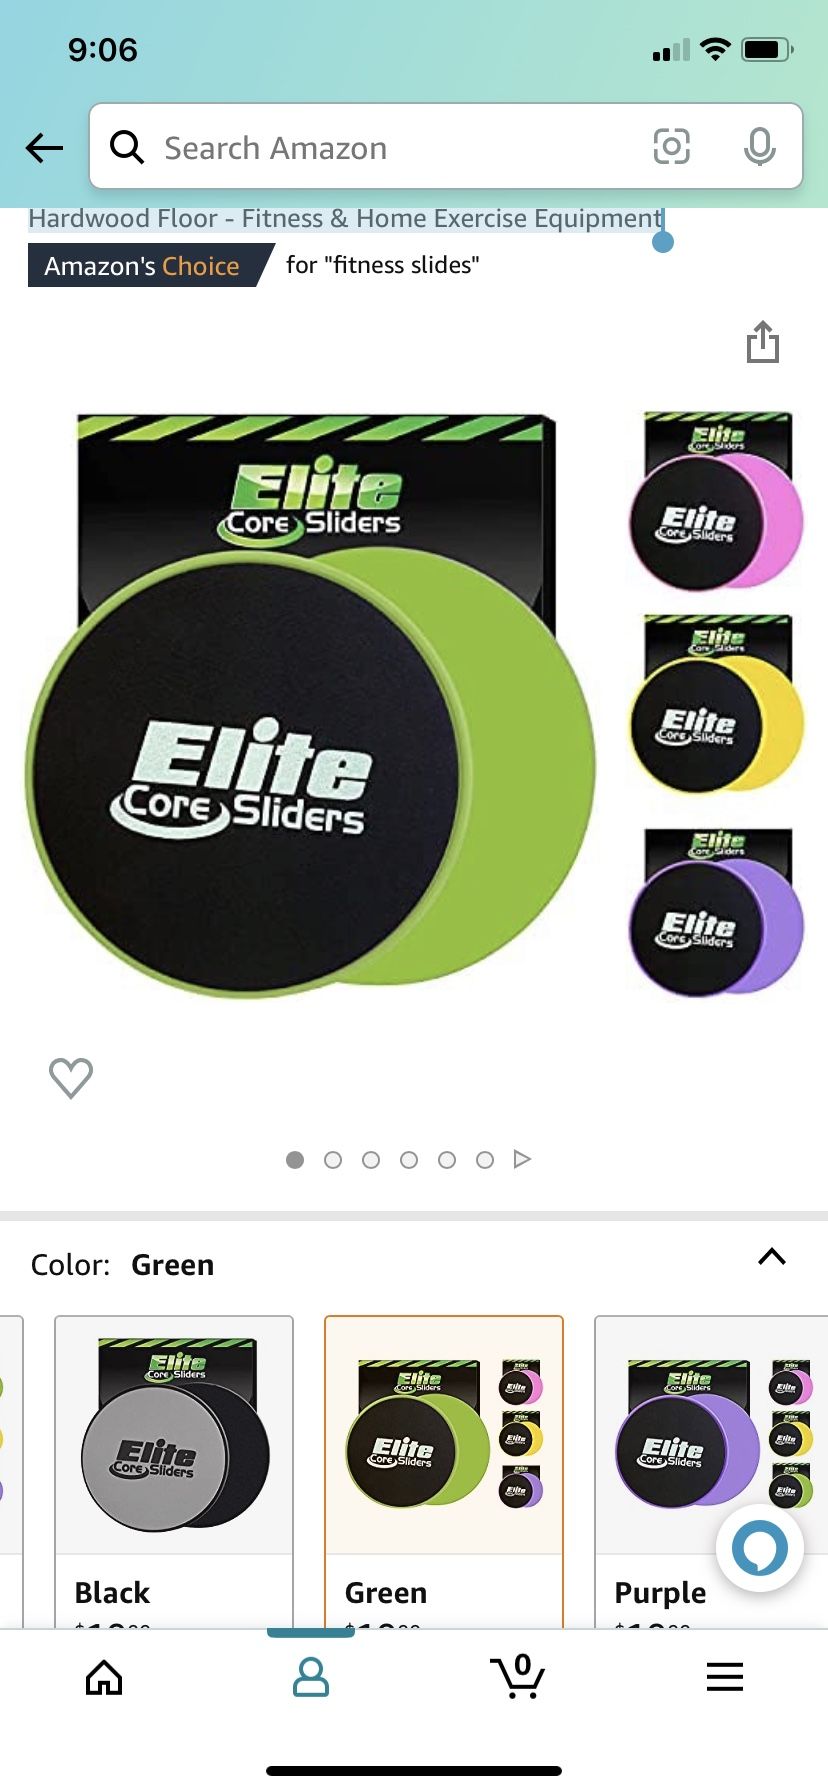 Elite Sportz Core Sliders for Working Out - Pack of 2 Compact, Dual Sided Gliding Discs for Full Body Workout on Carpet or Hardwood Floor 